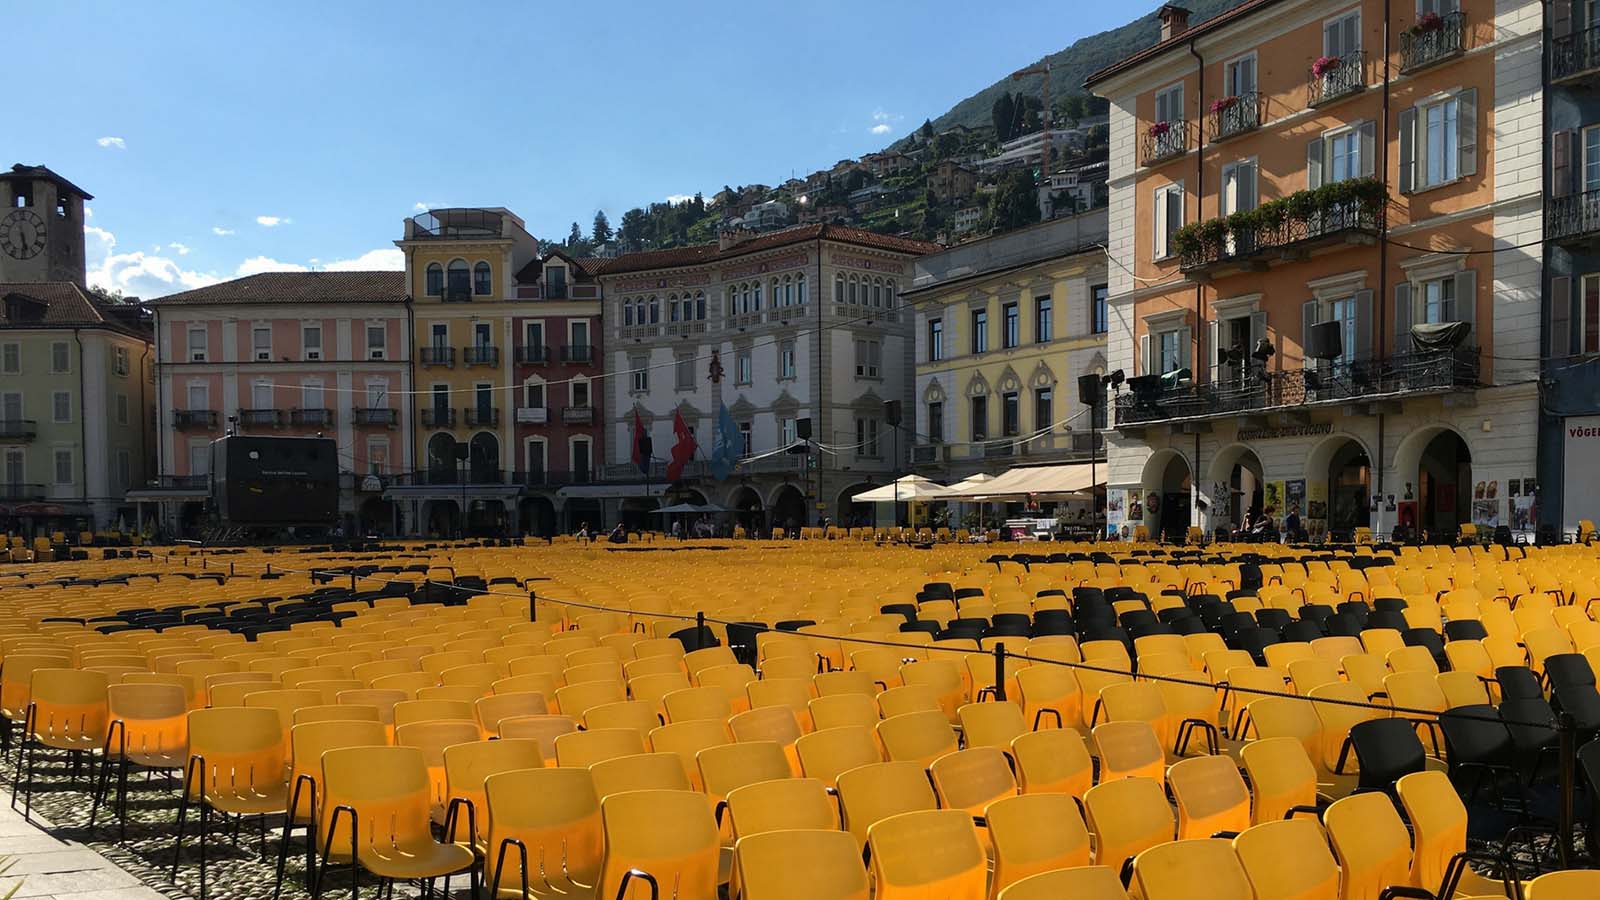 Several rows of empty yellow chairs in a square in Locarno, Switzerland